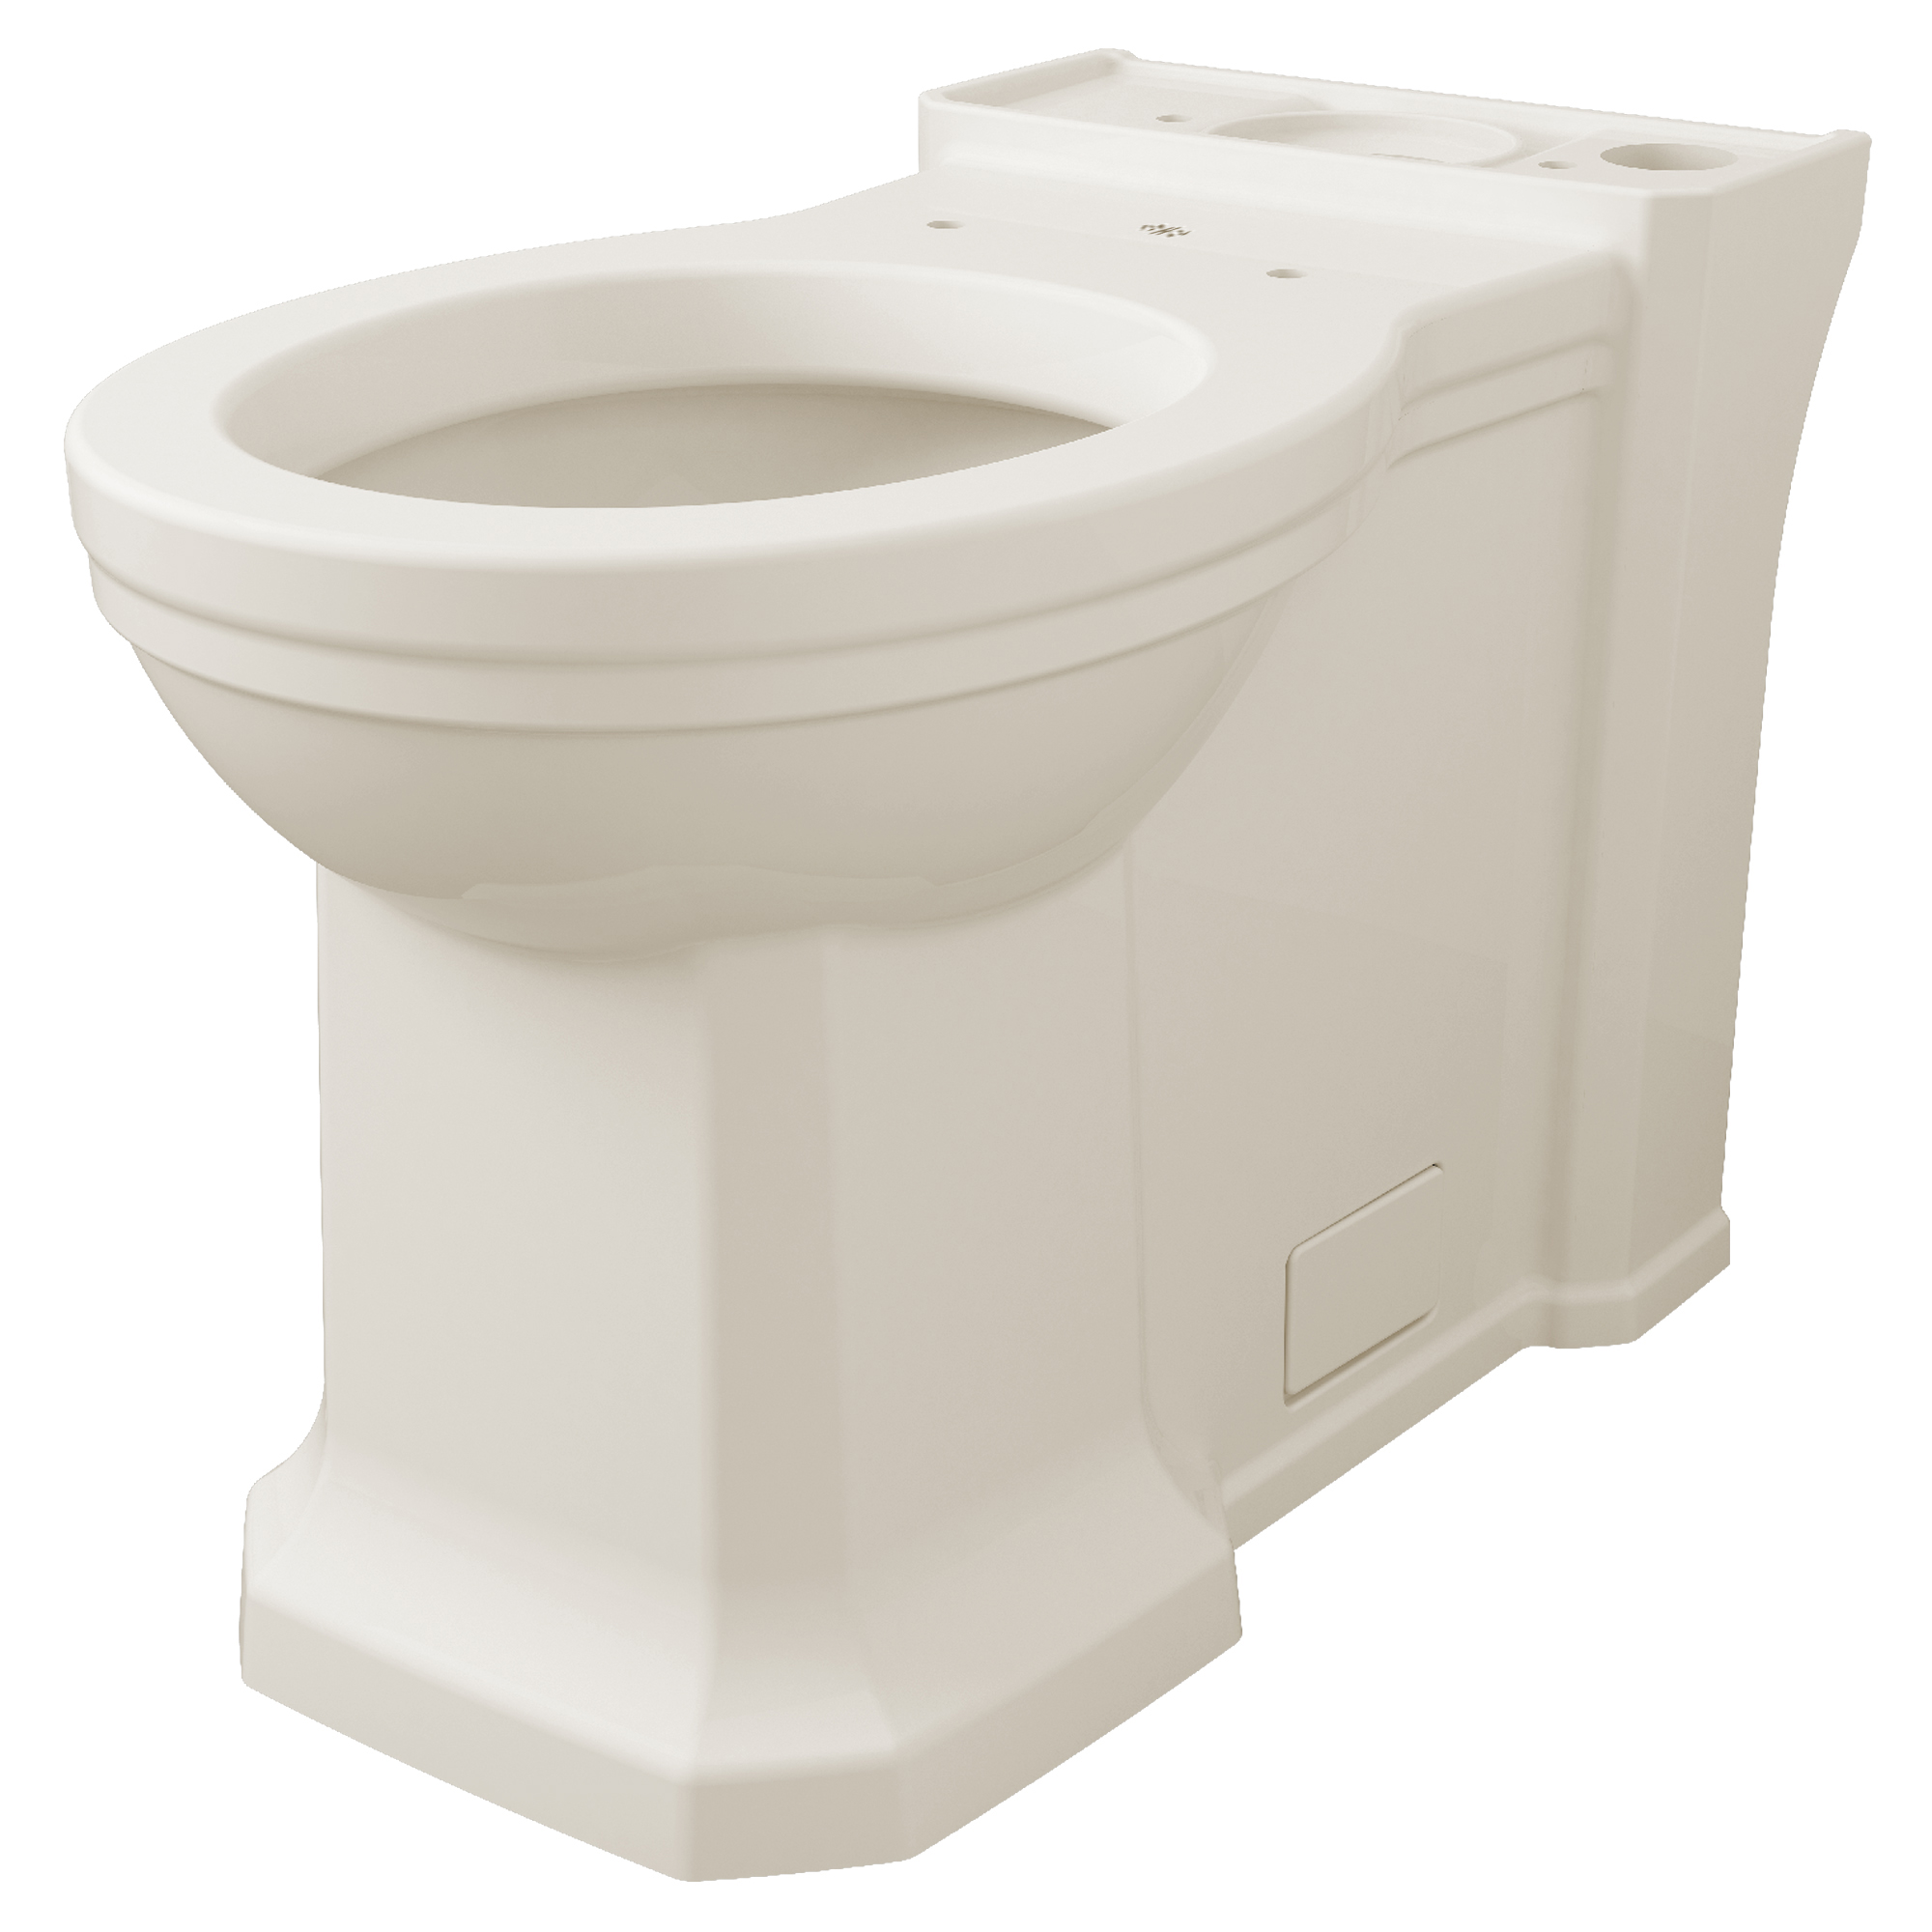 Fitzgerald™ Chair Height Round Front Toilet Bowl with Seat